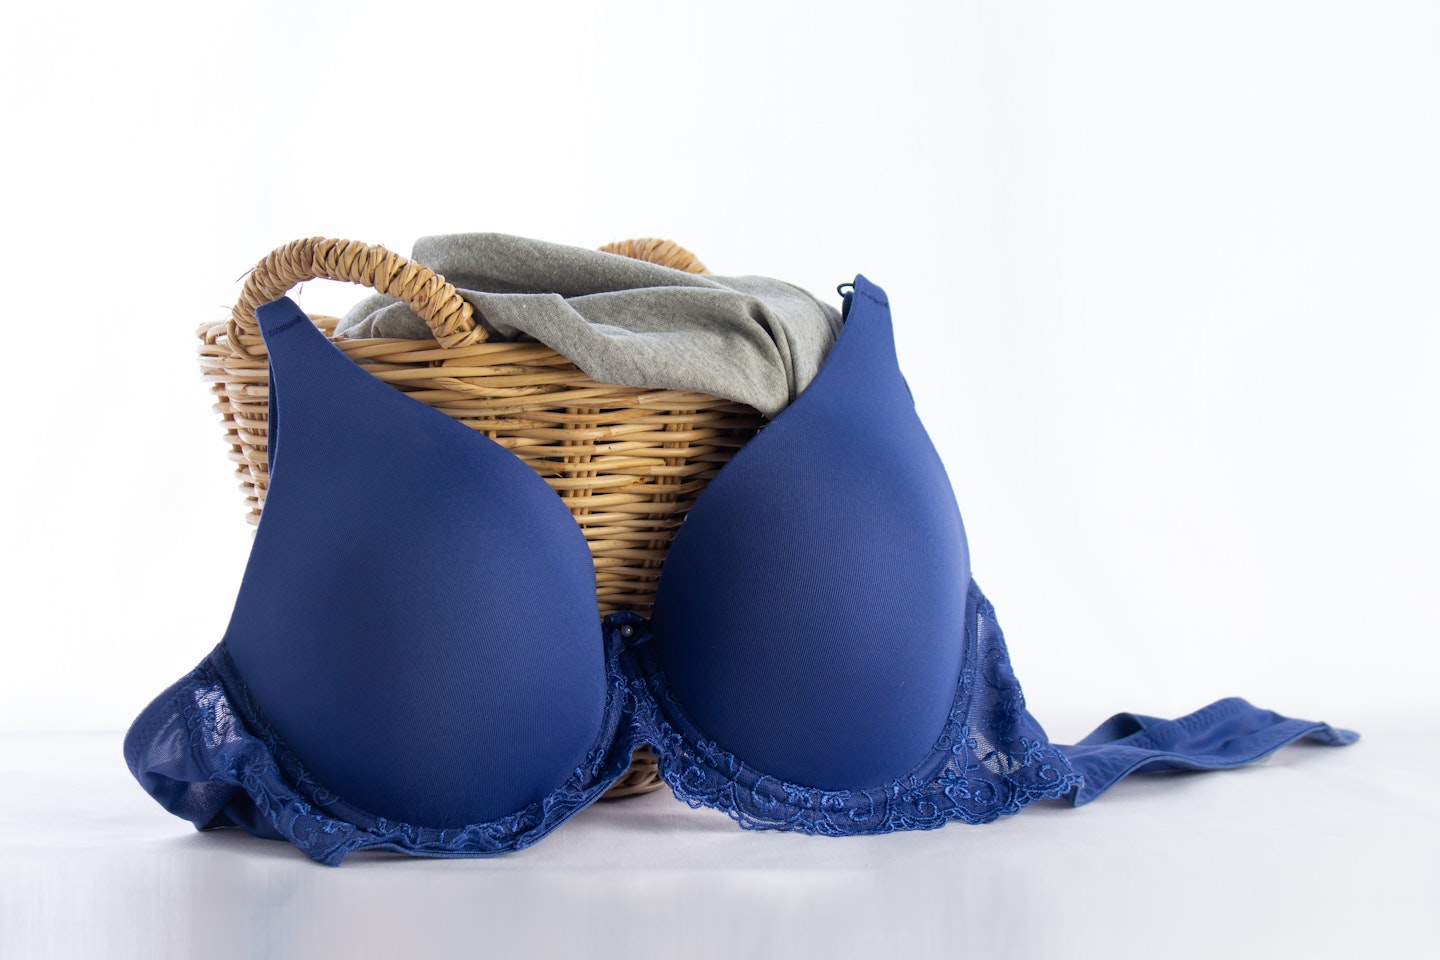 Everything you need to know about bra fittings